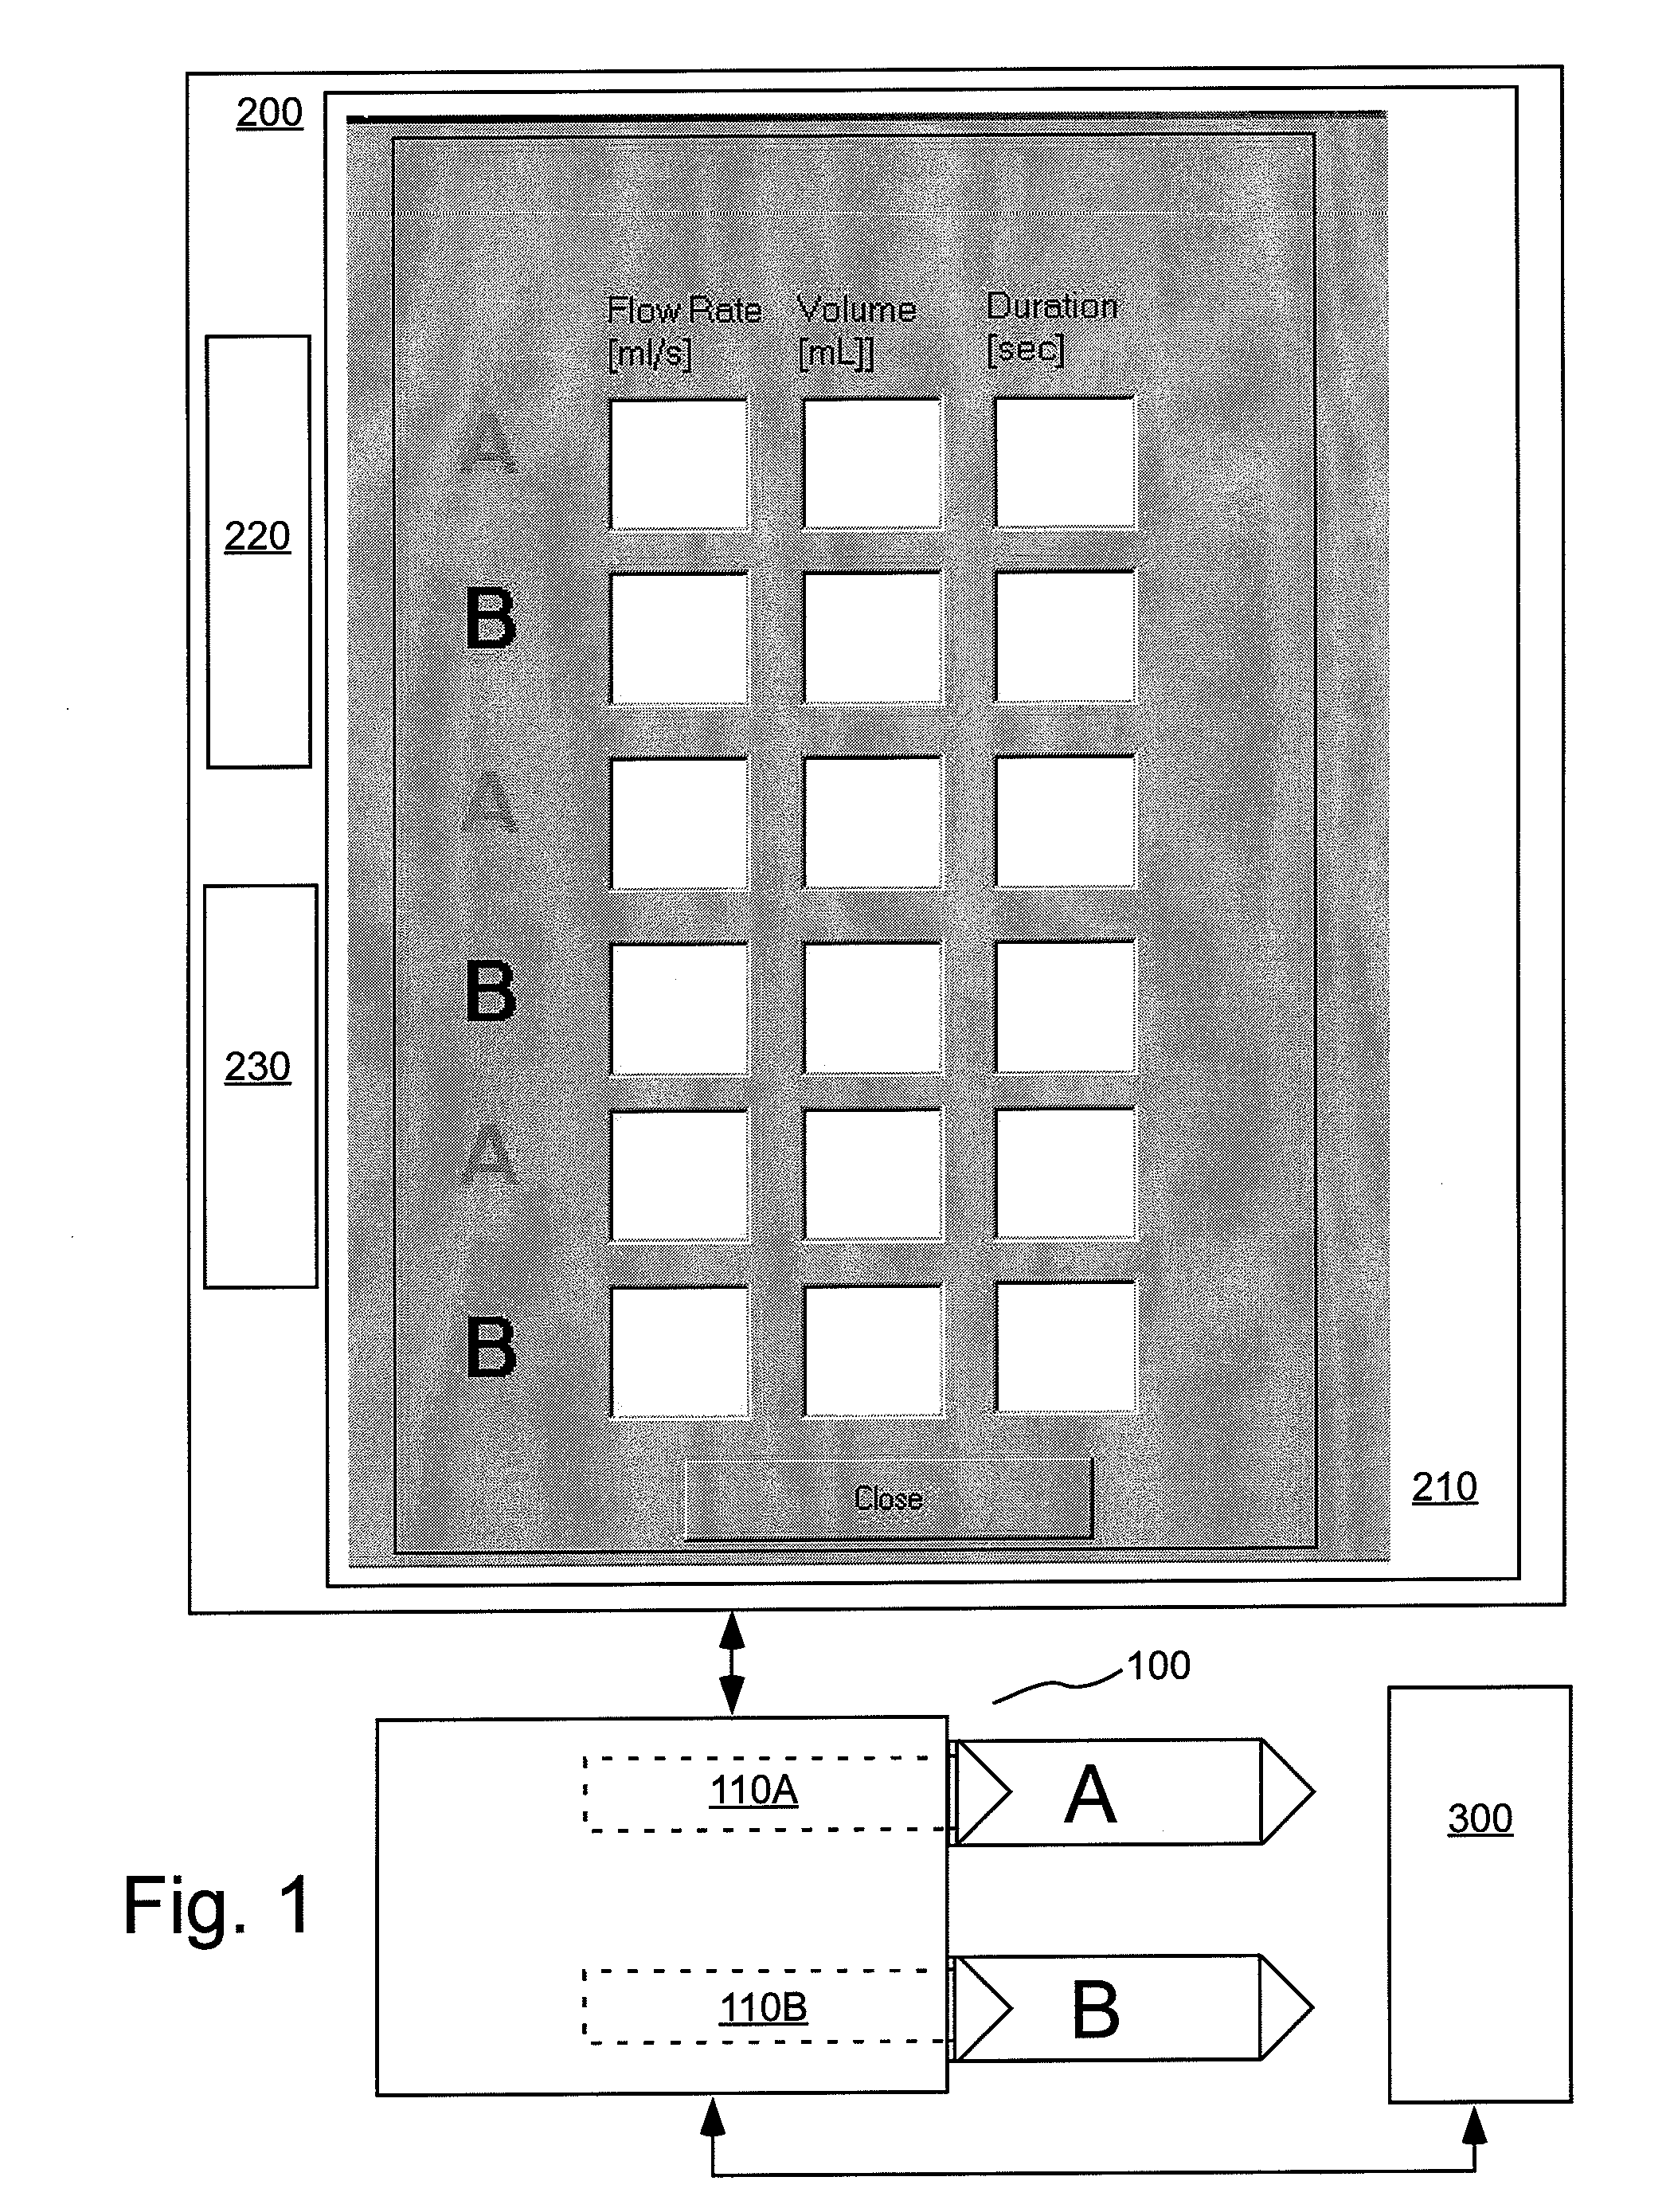 Patient-based parameter generation systems for medical injection procedures